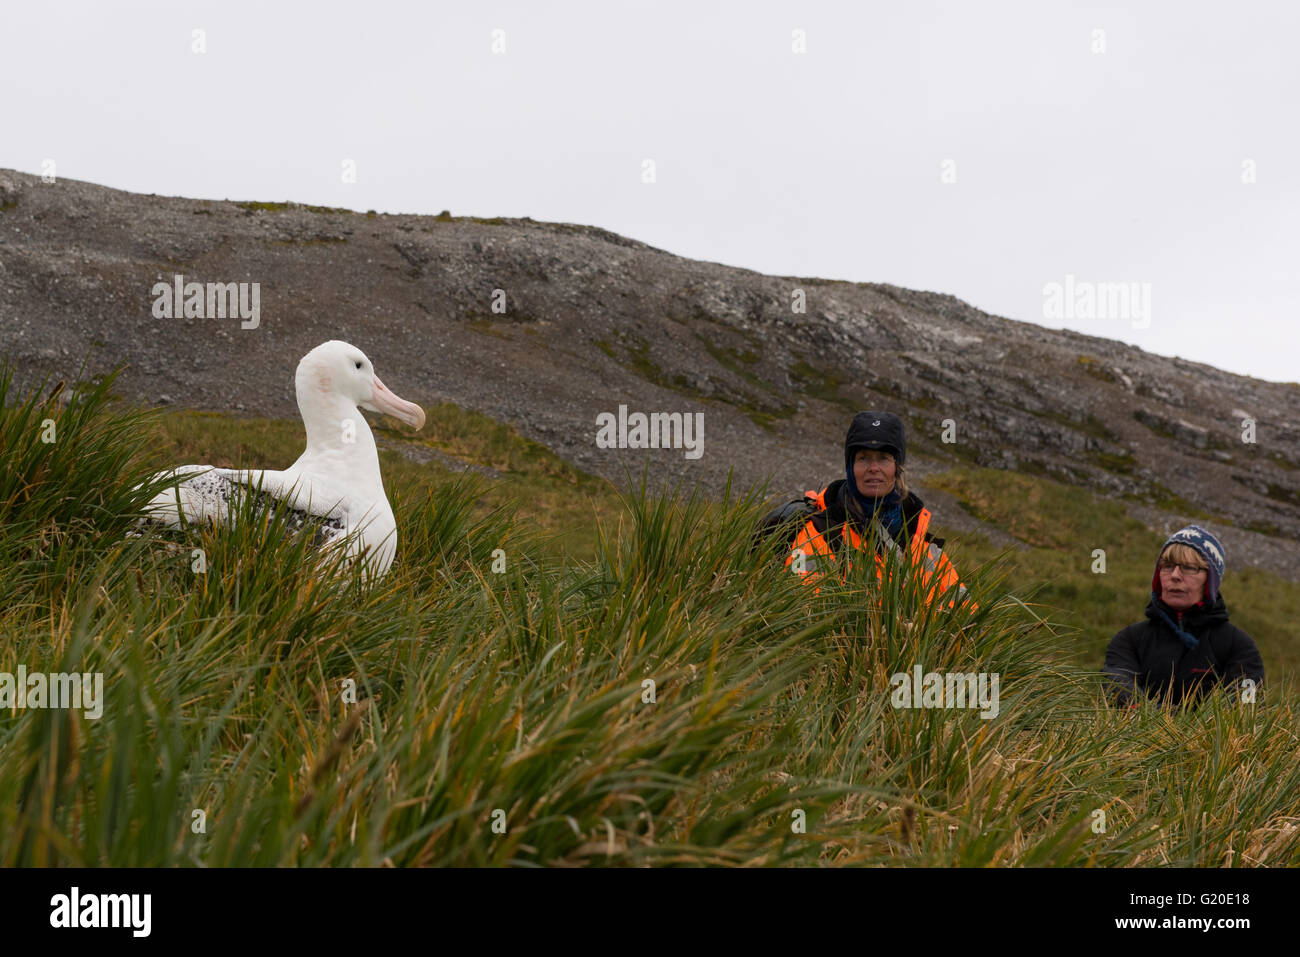 Wandering Albatross Diomeda exulans adult on nest and biologist Sally Poncet monitoring breeding albatross at Cape Alexandra Sou Stock Photo